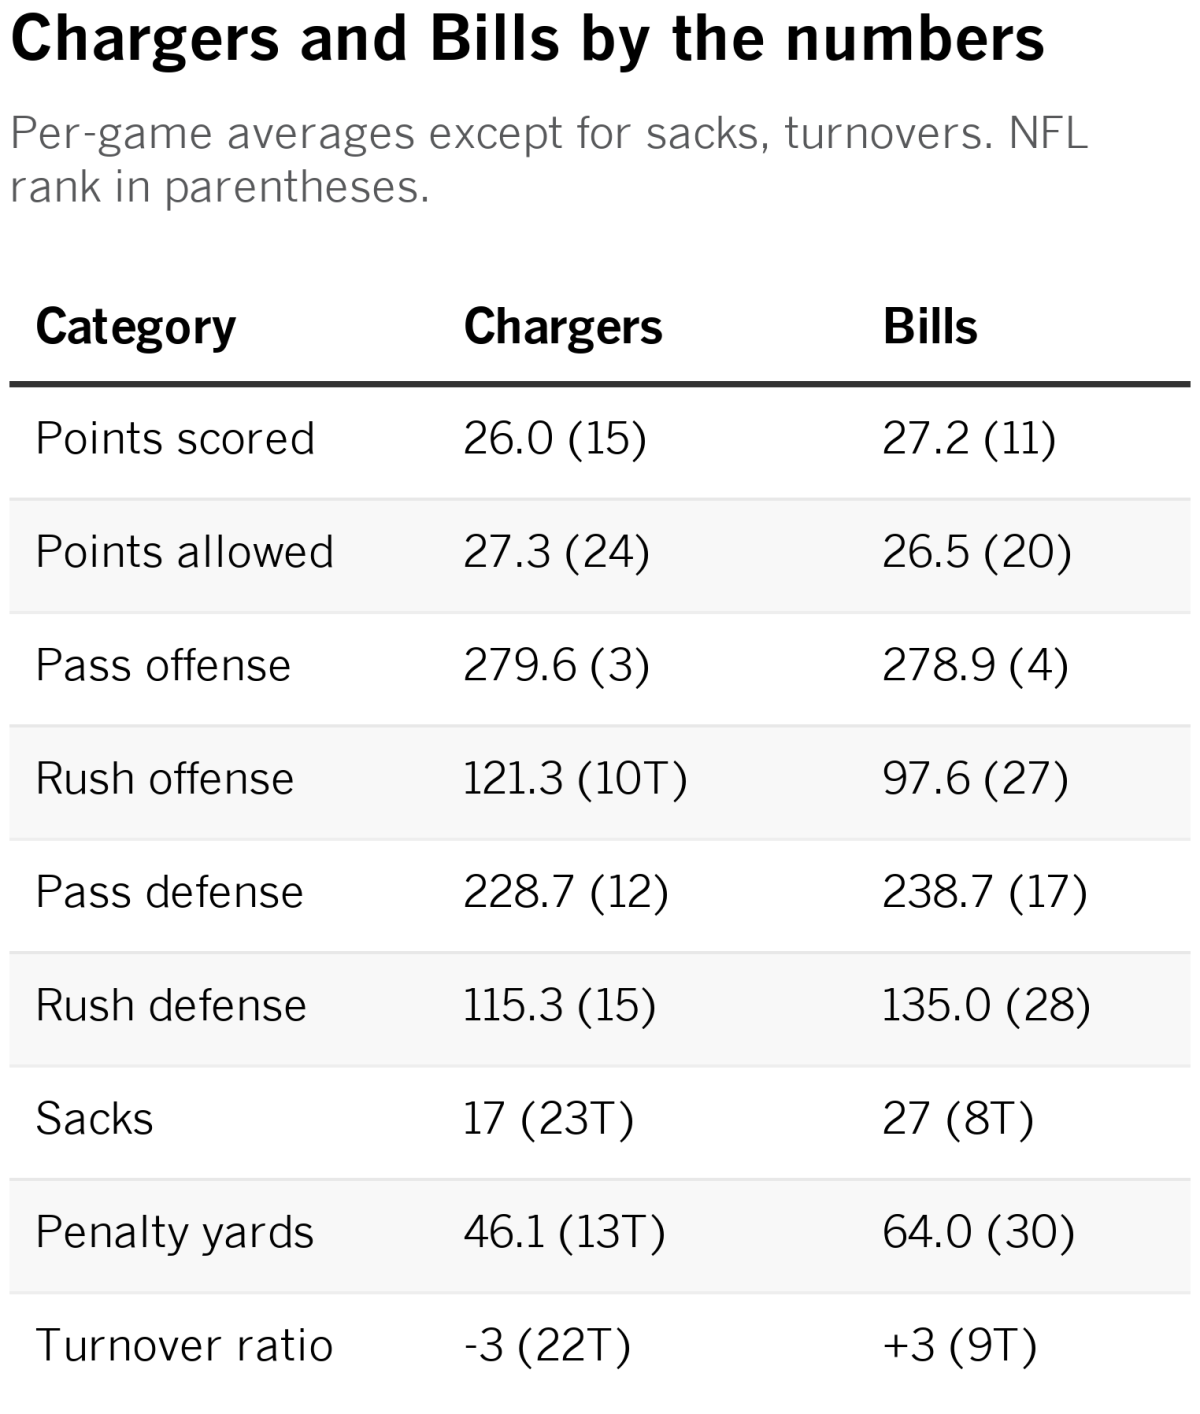 Chargers by the numbers